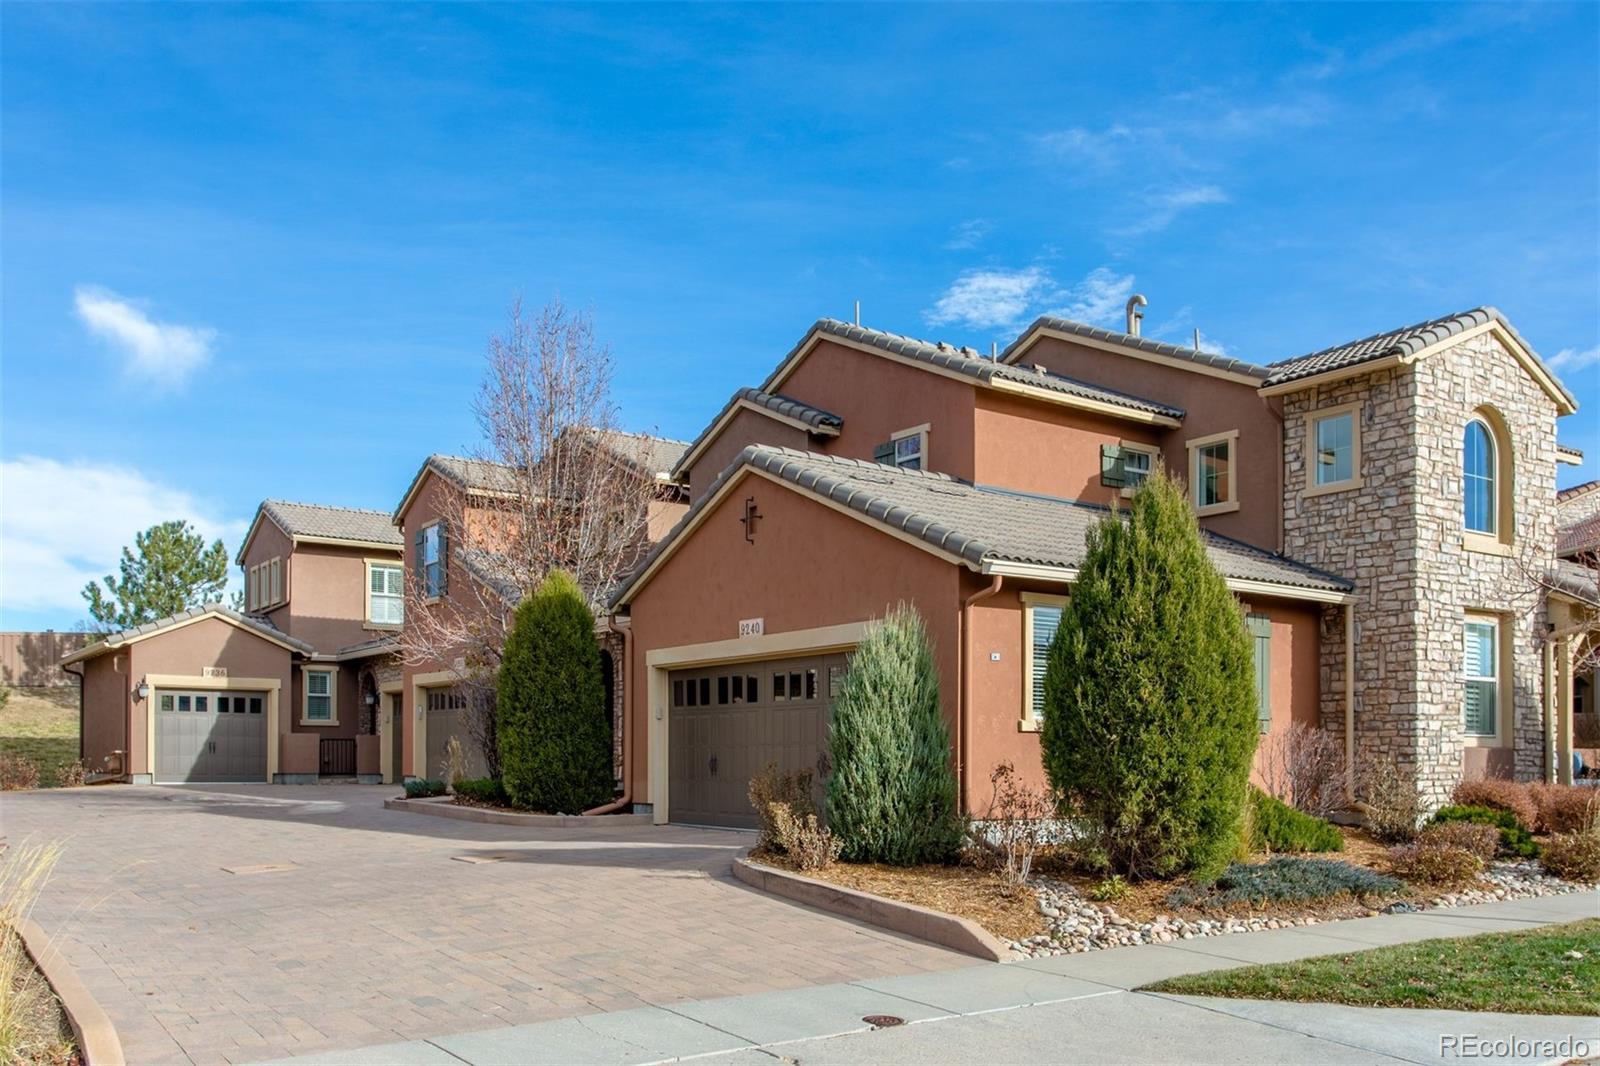 9236  viaggio way, Highlands Ranch sold home. Closed on 2024-01-16 for $825,000.